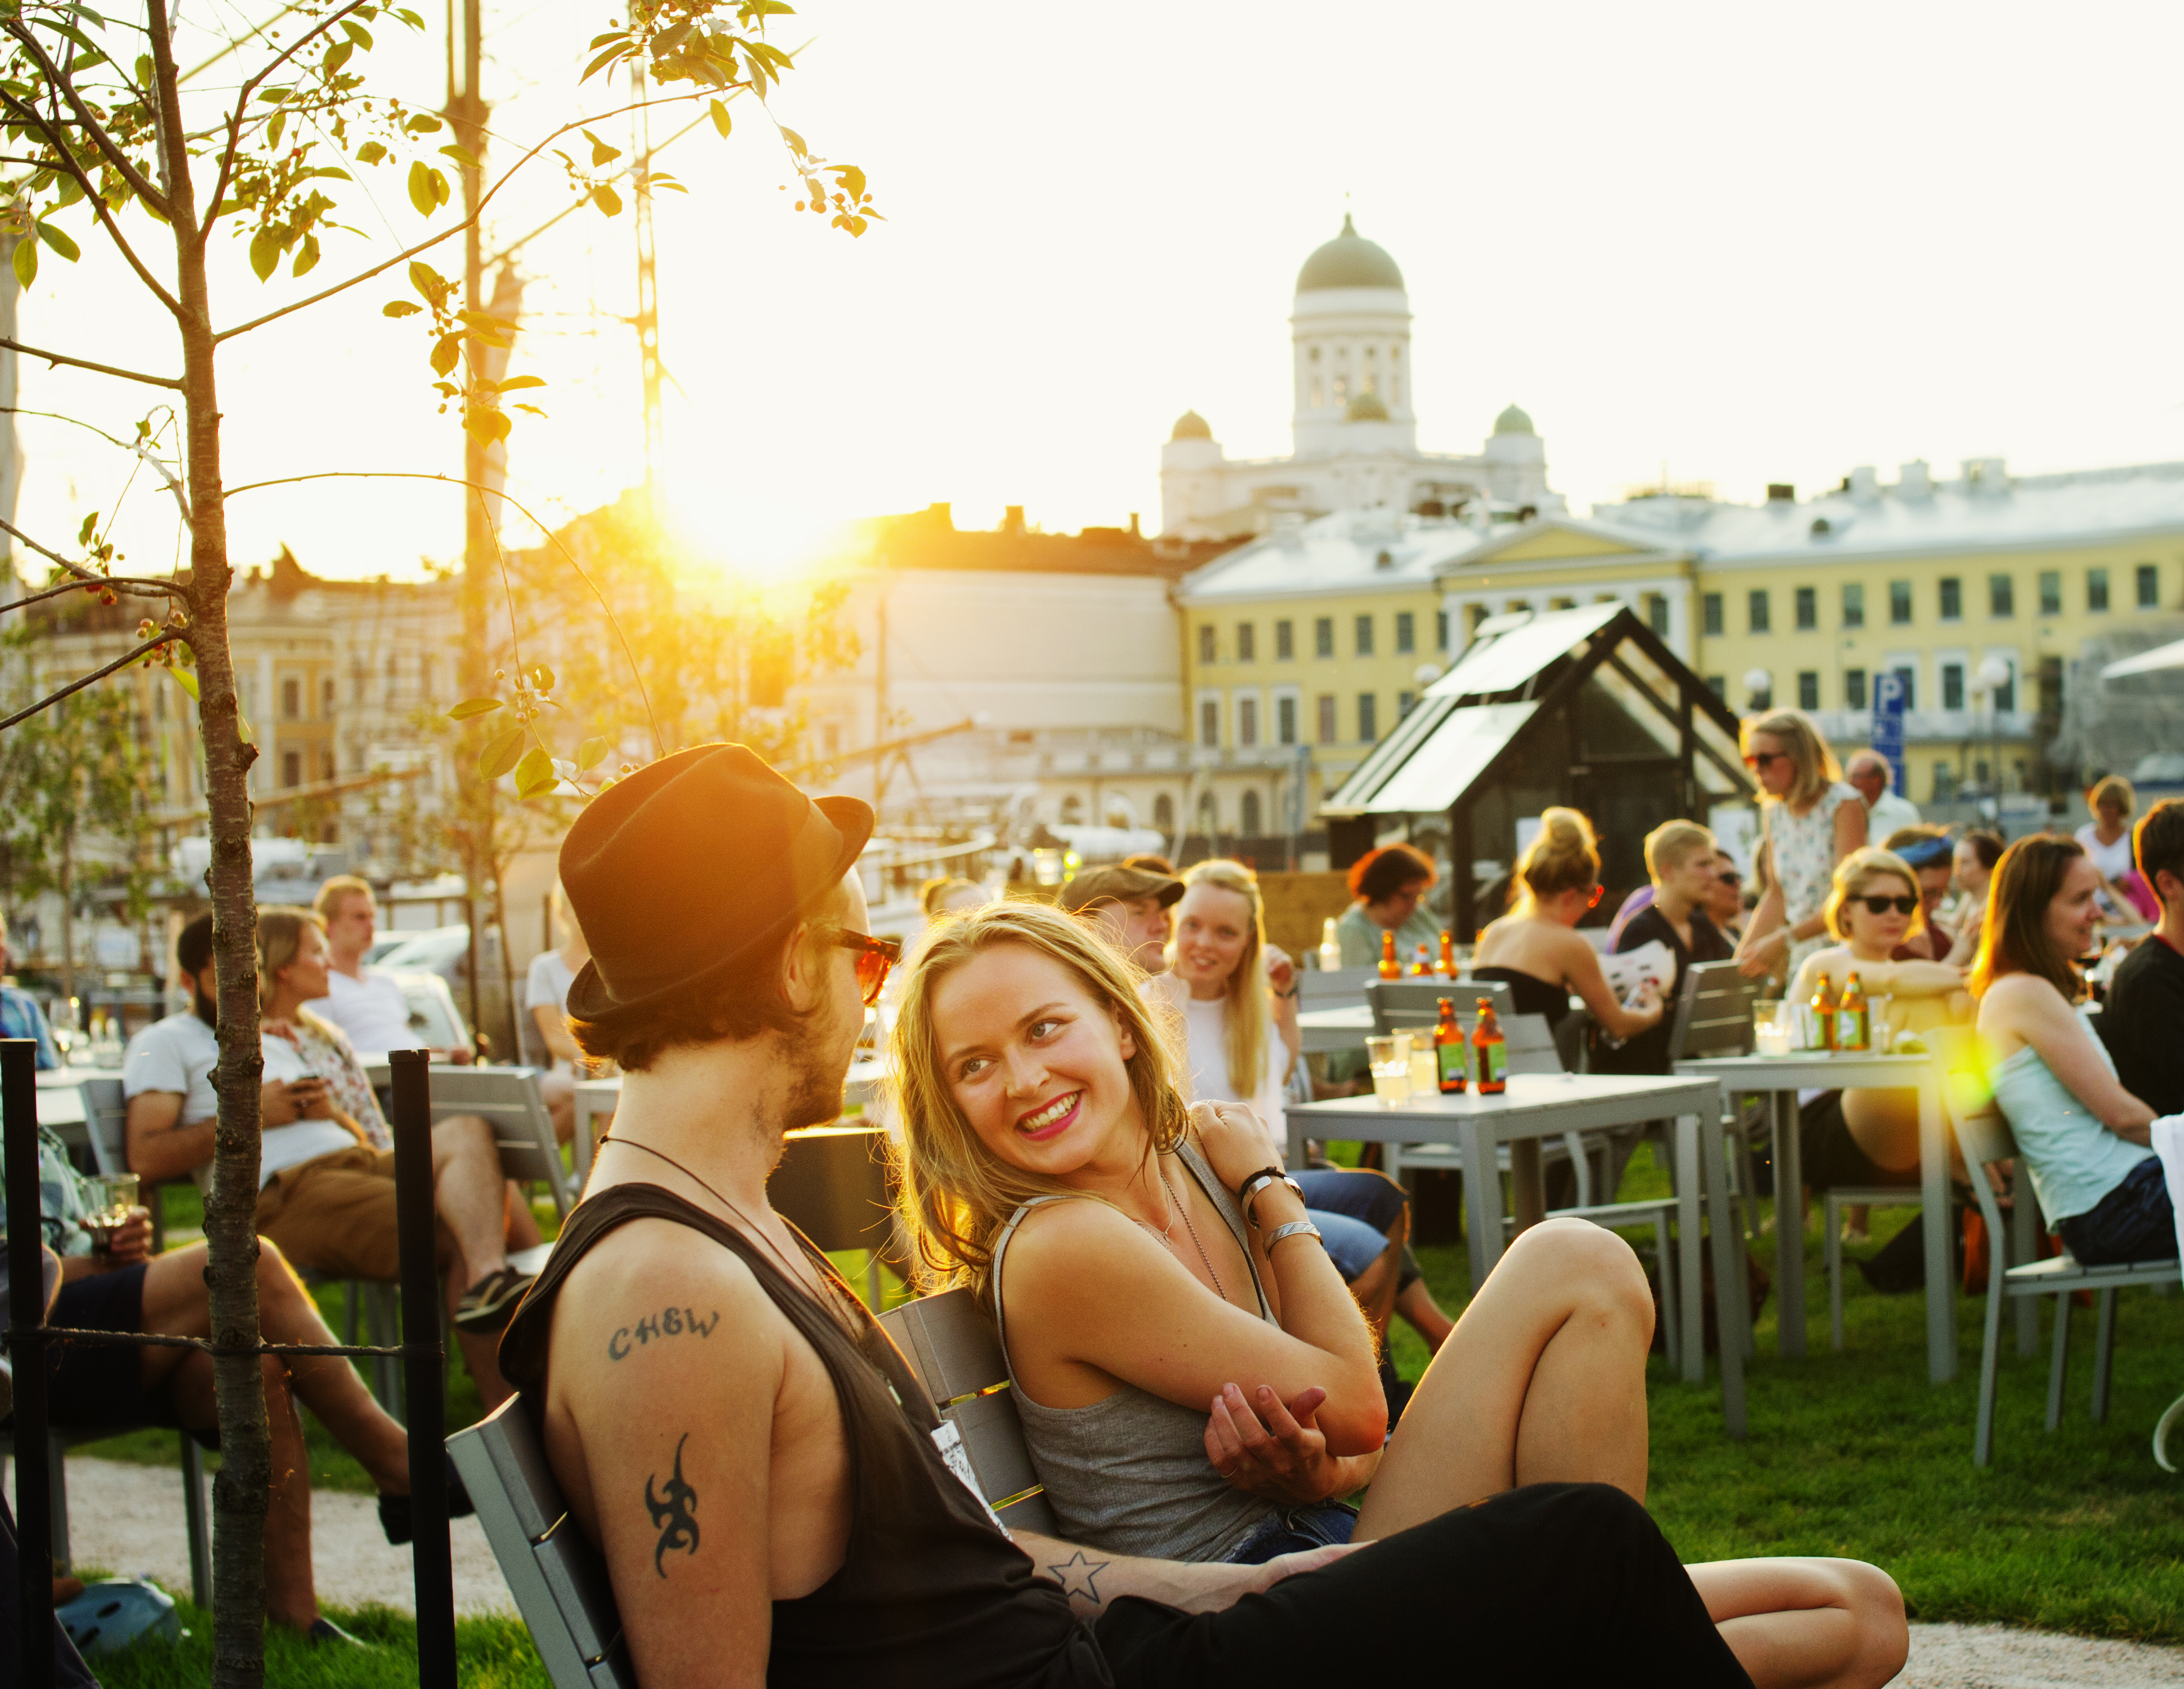 Young people enjoying their time in a sunny Helsinki